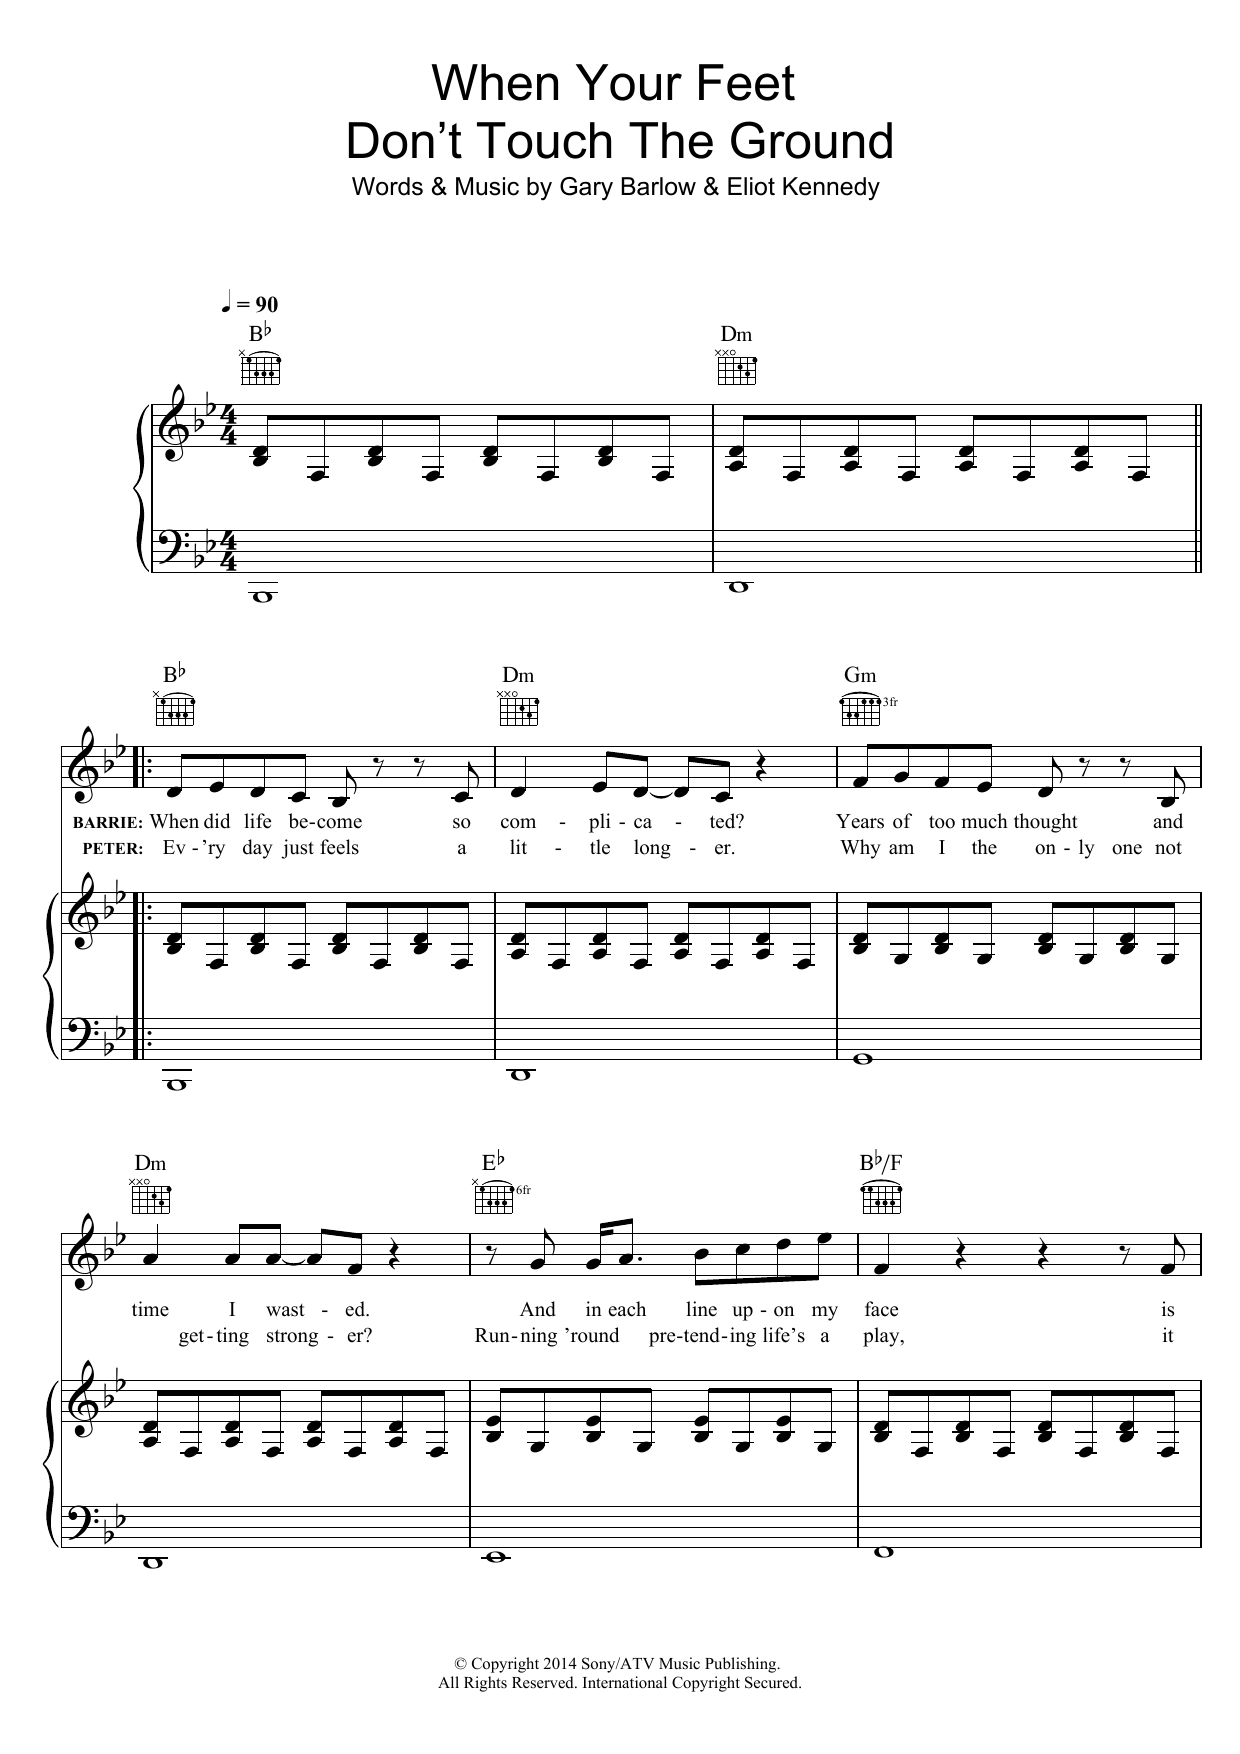 Download Gary Barlow When Your Feet Don't Touch The Ground ( Sheet Music